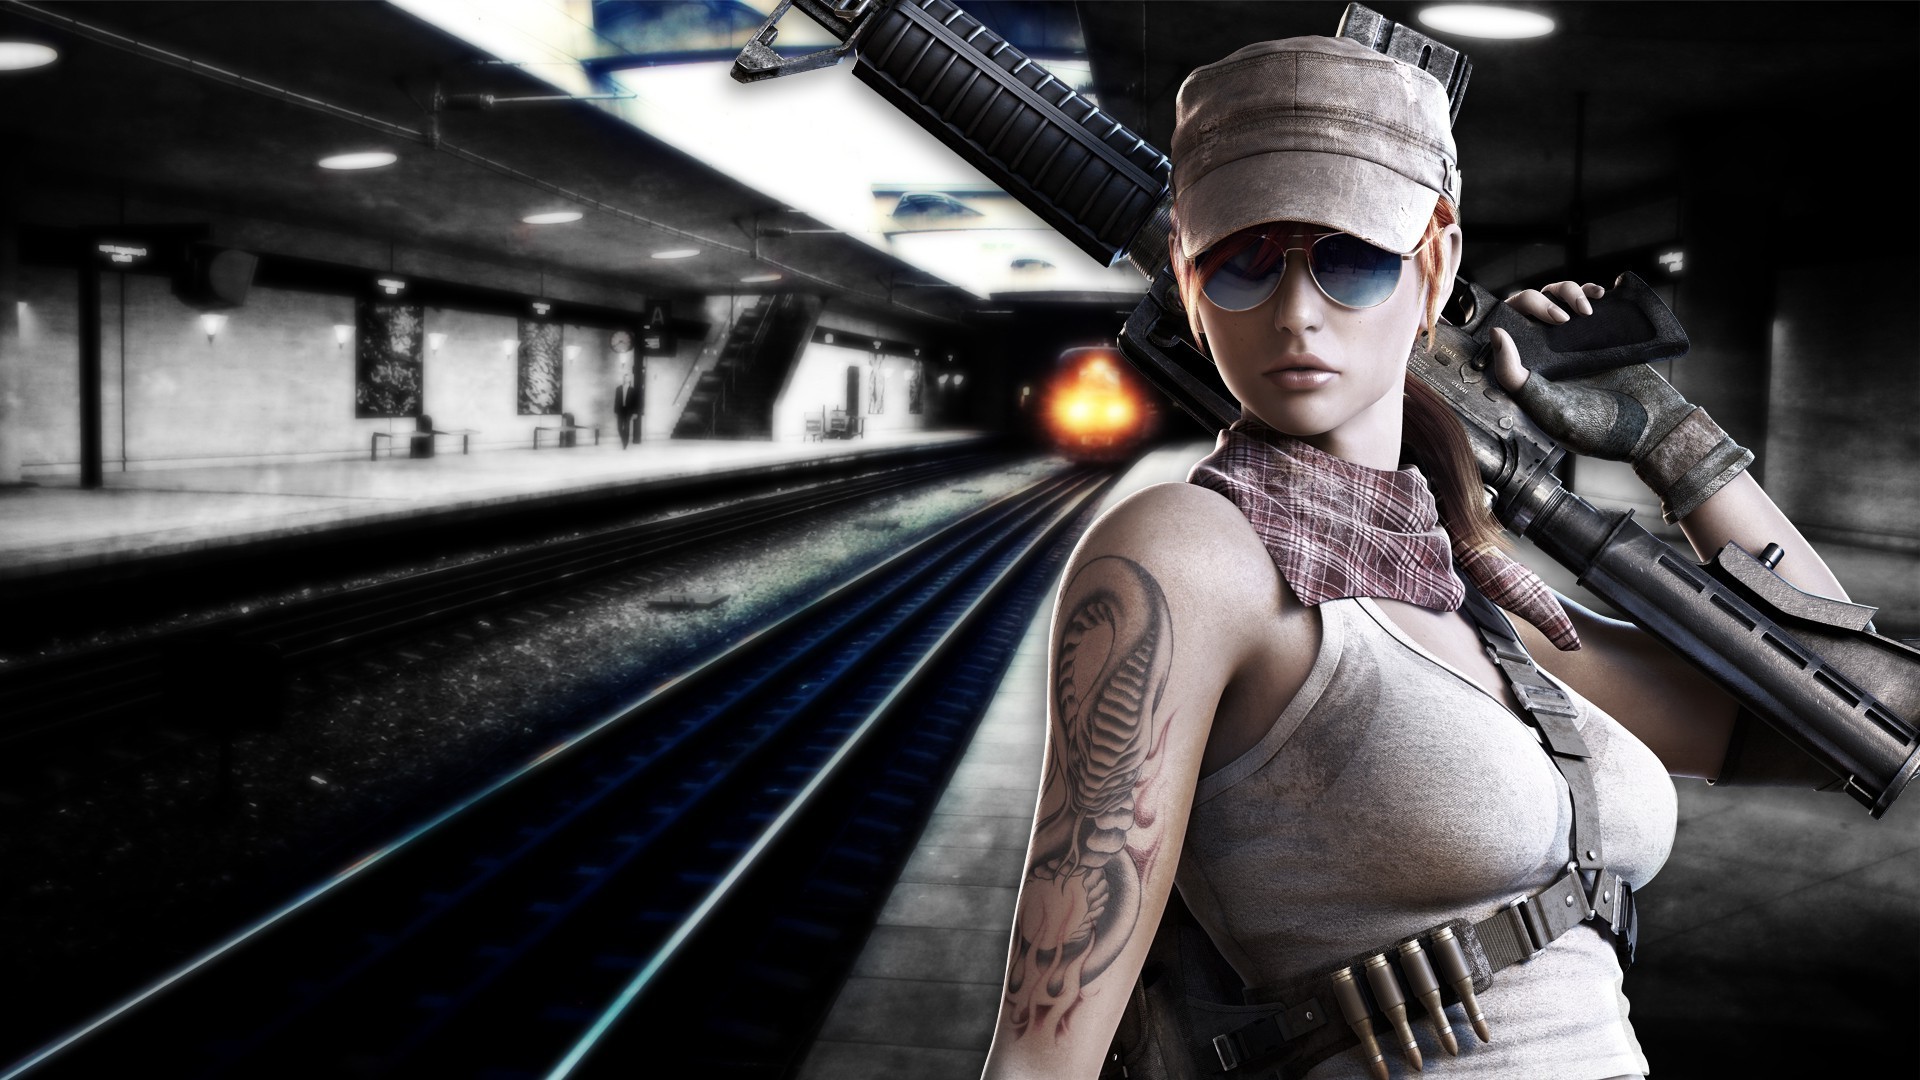 weapons and army tube train fashion portrait transportation system railway